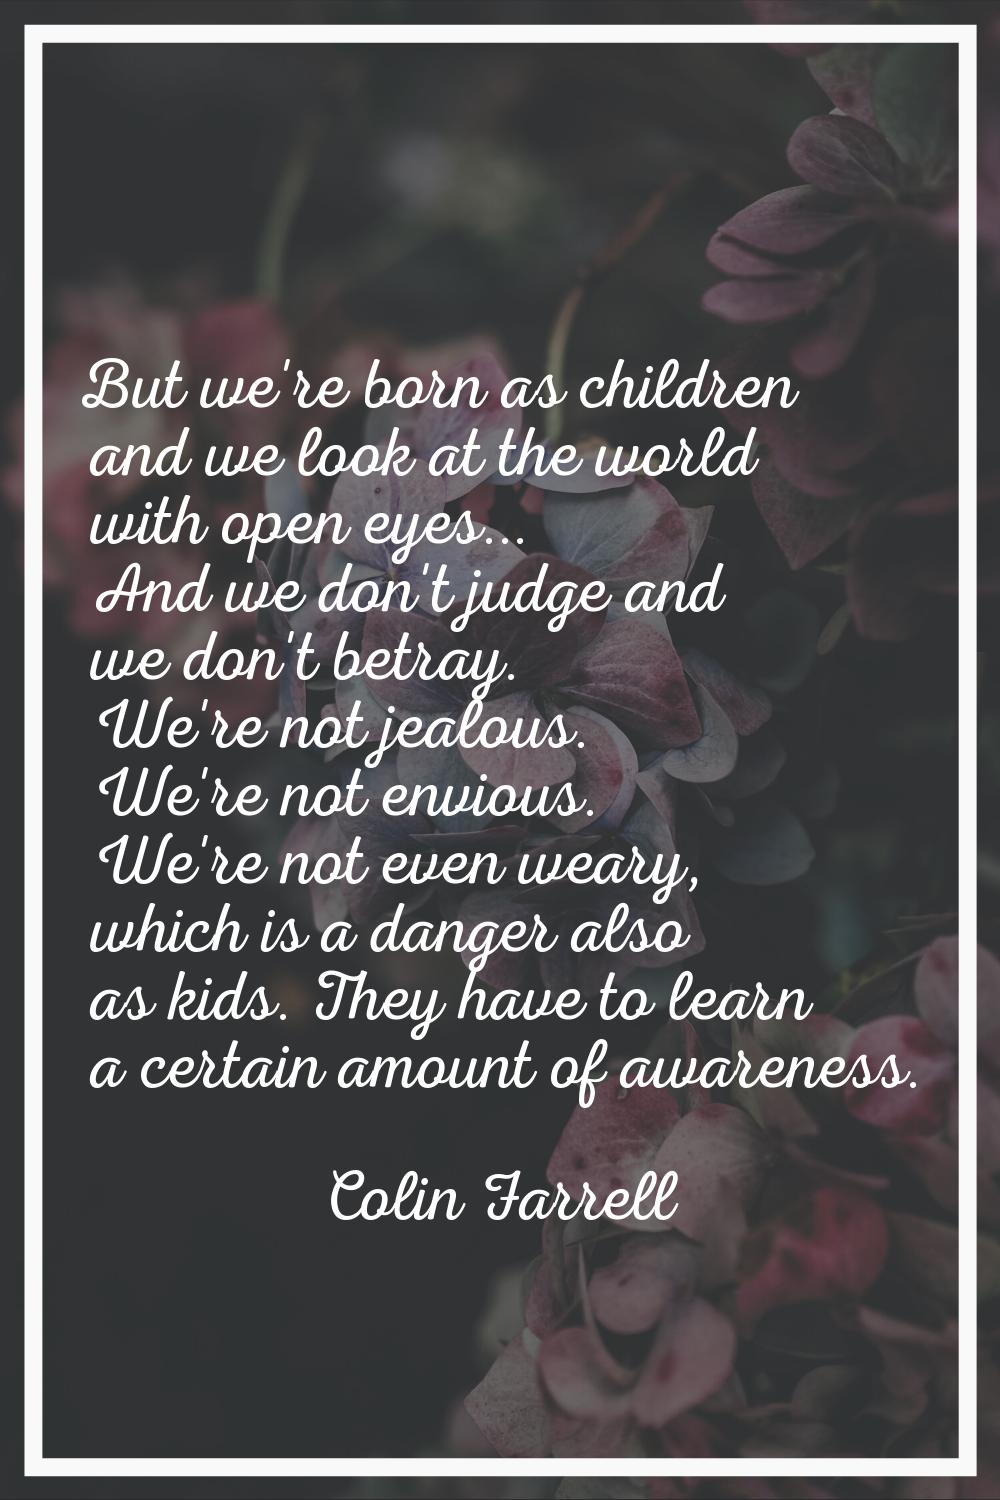 But we're born as children and we look at the world with open eyes... And we don't judge and we don